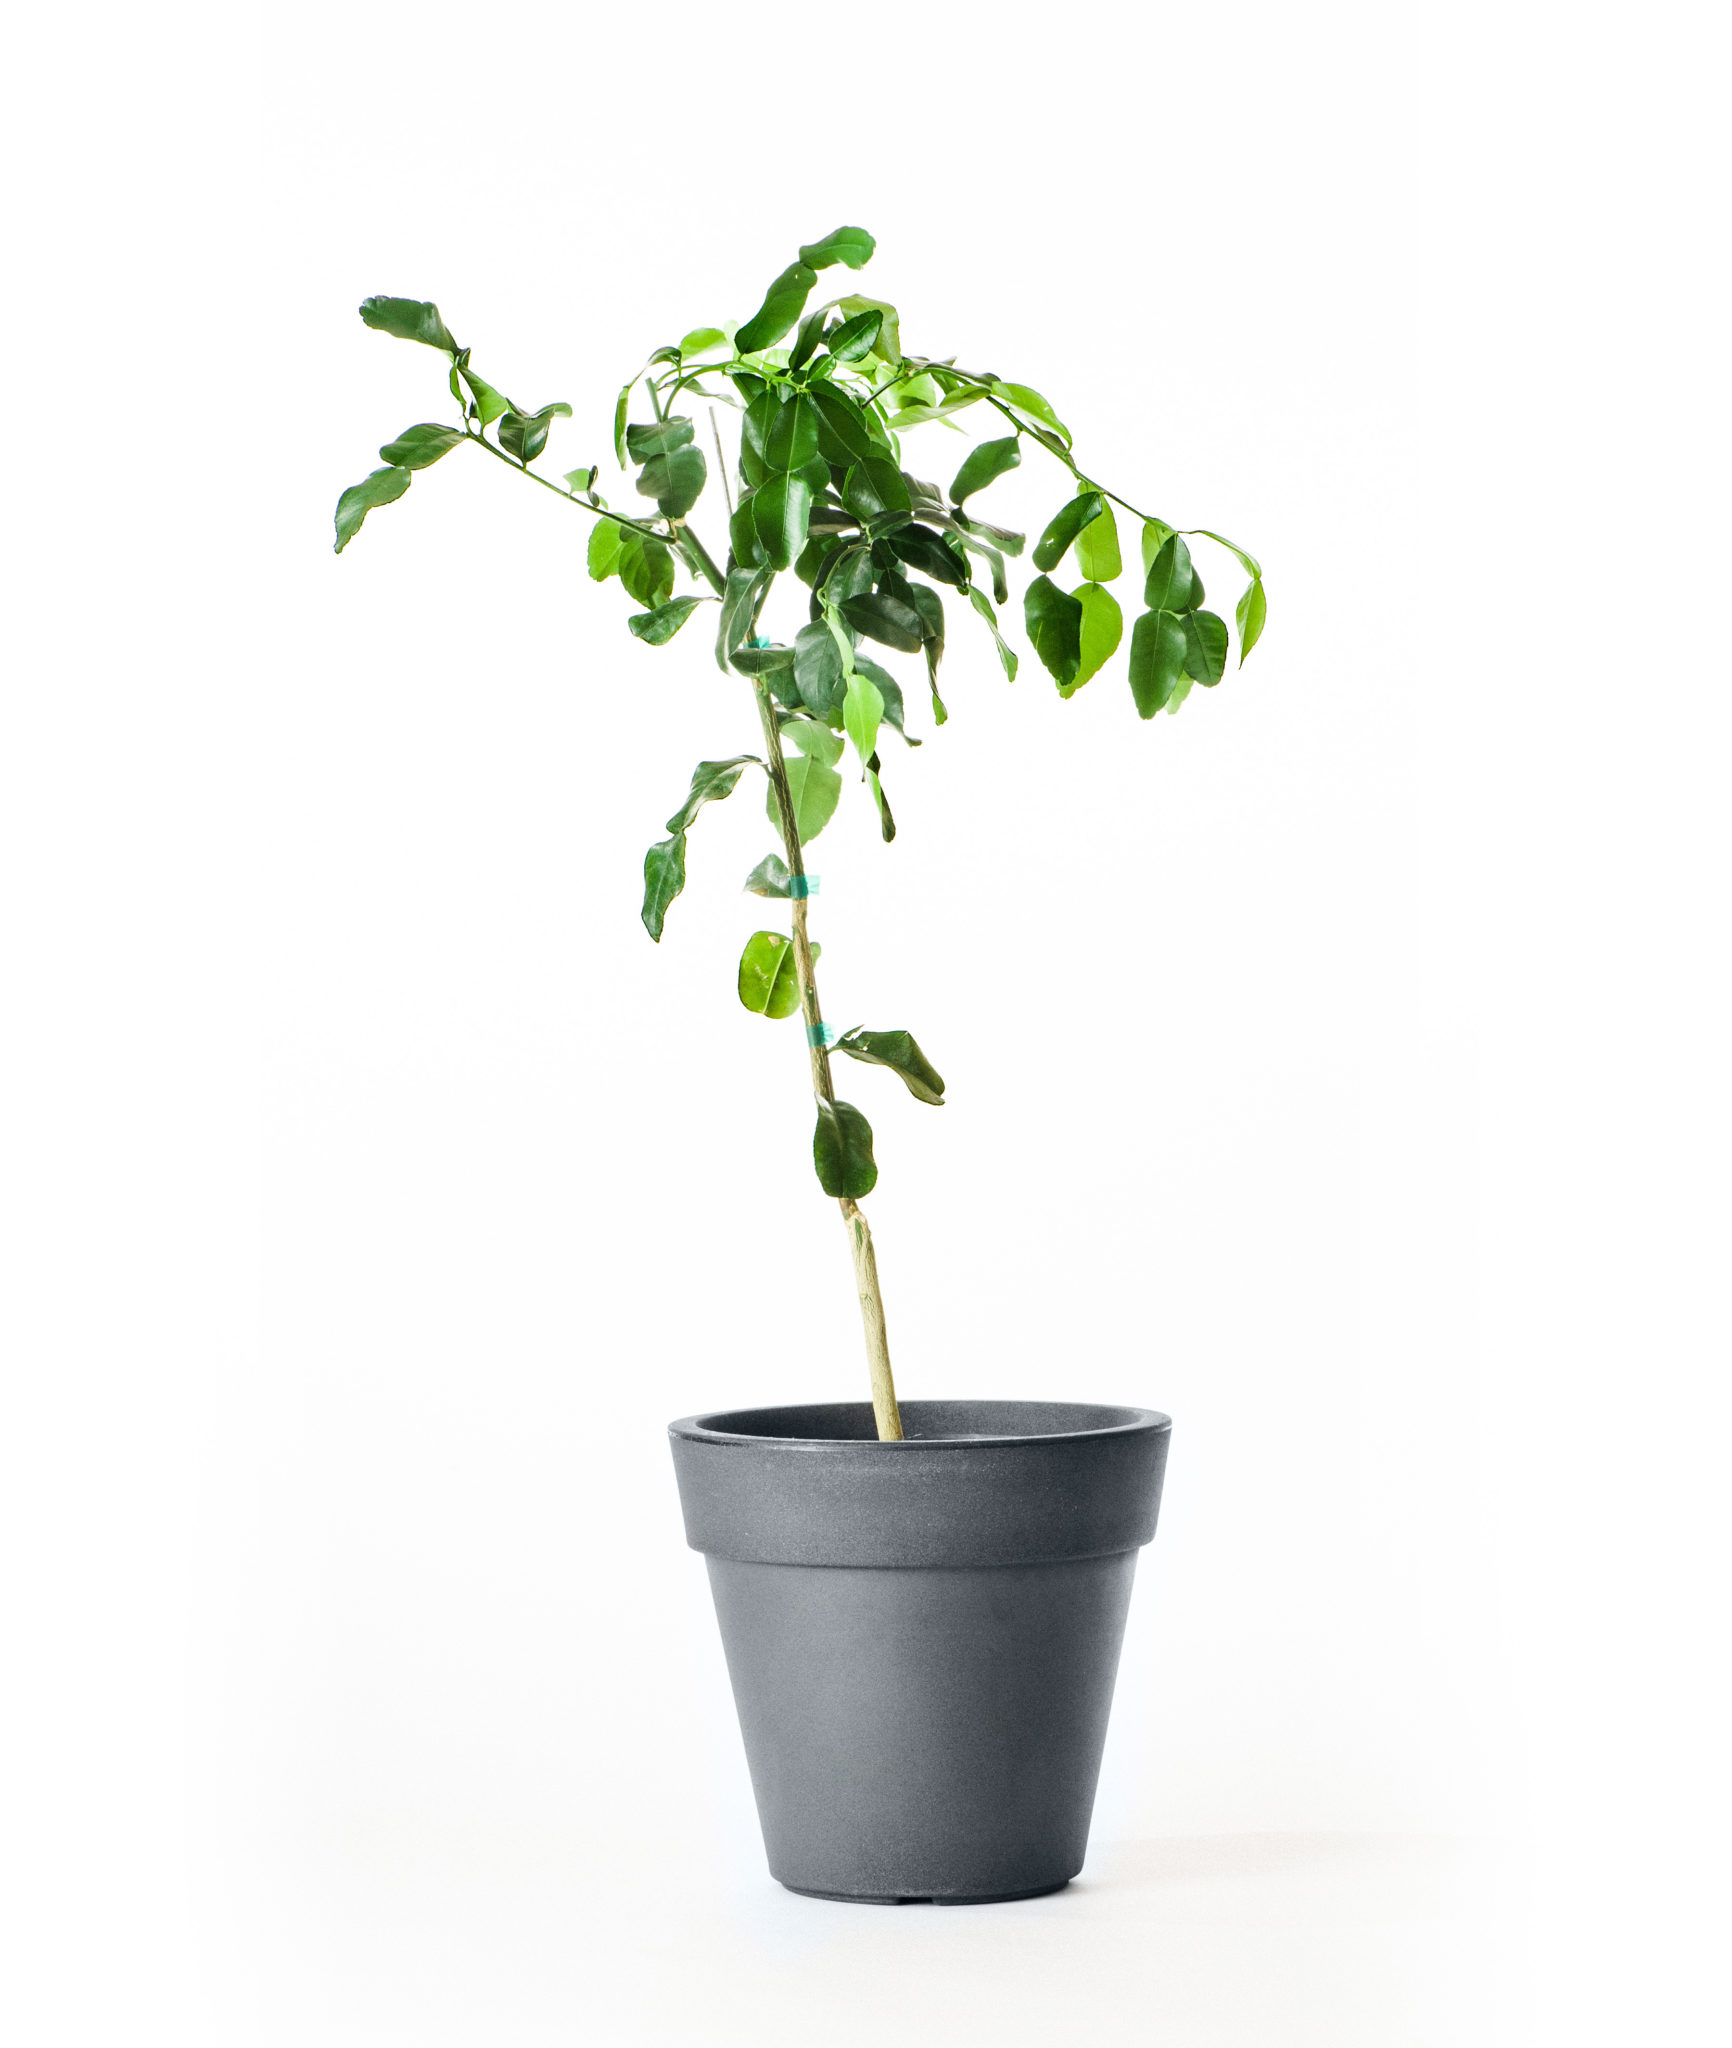 Image of Dwarf Kaffir Lime Tree (Age: 4 - 5 Years Height: 3 - 4 FT)